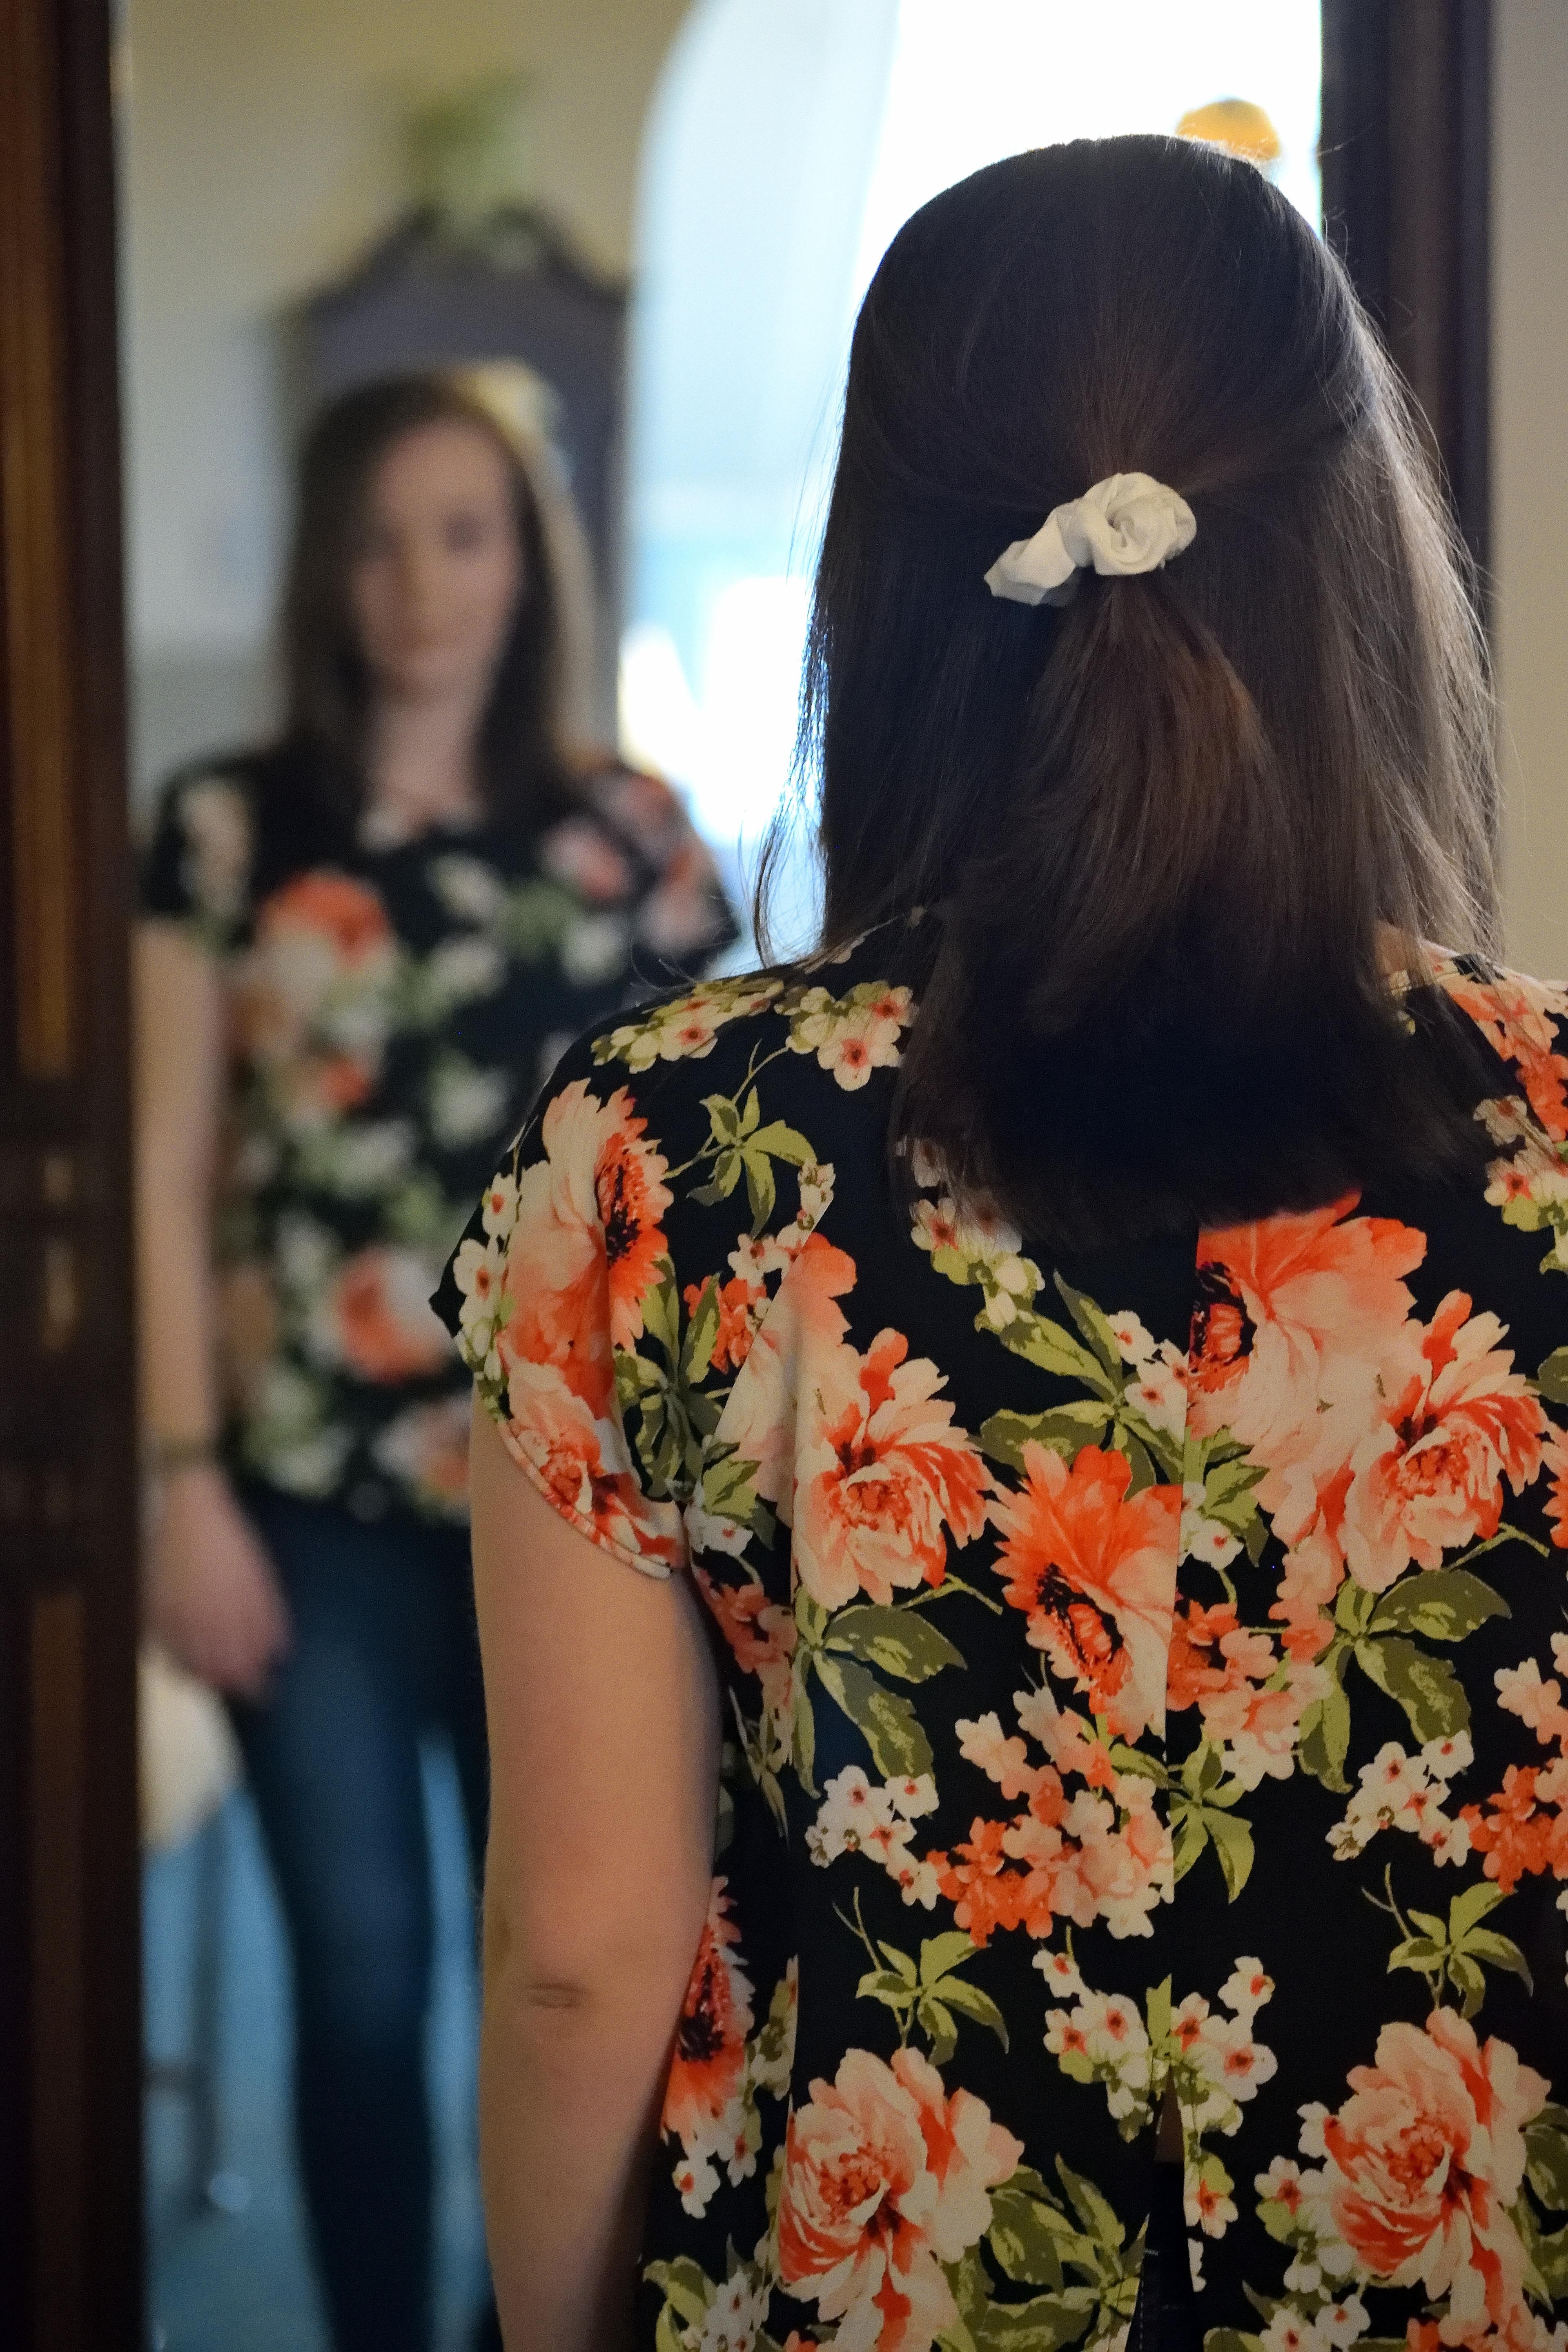 A young woman in a flowered shirt looks at her reflection in the mirror